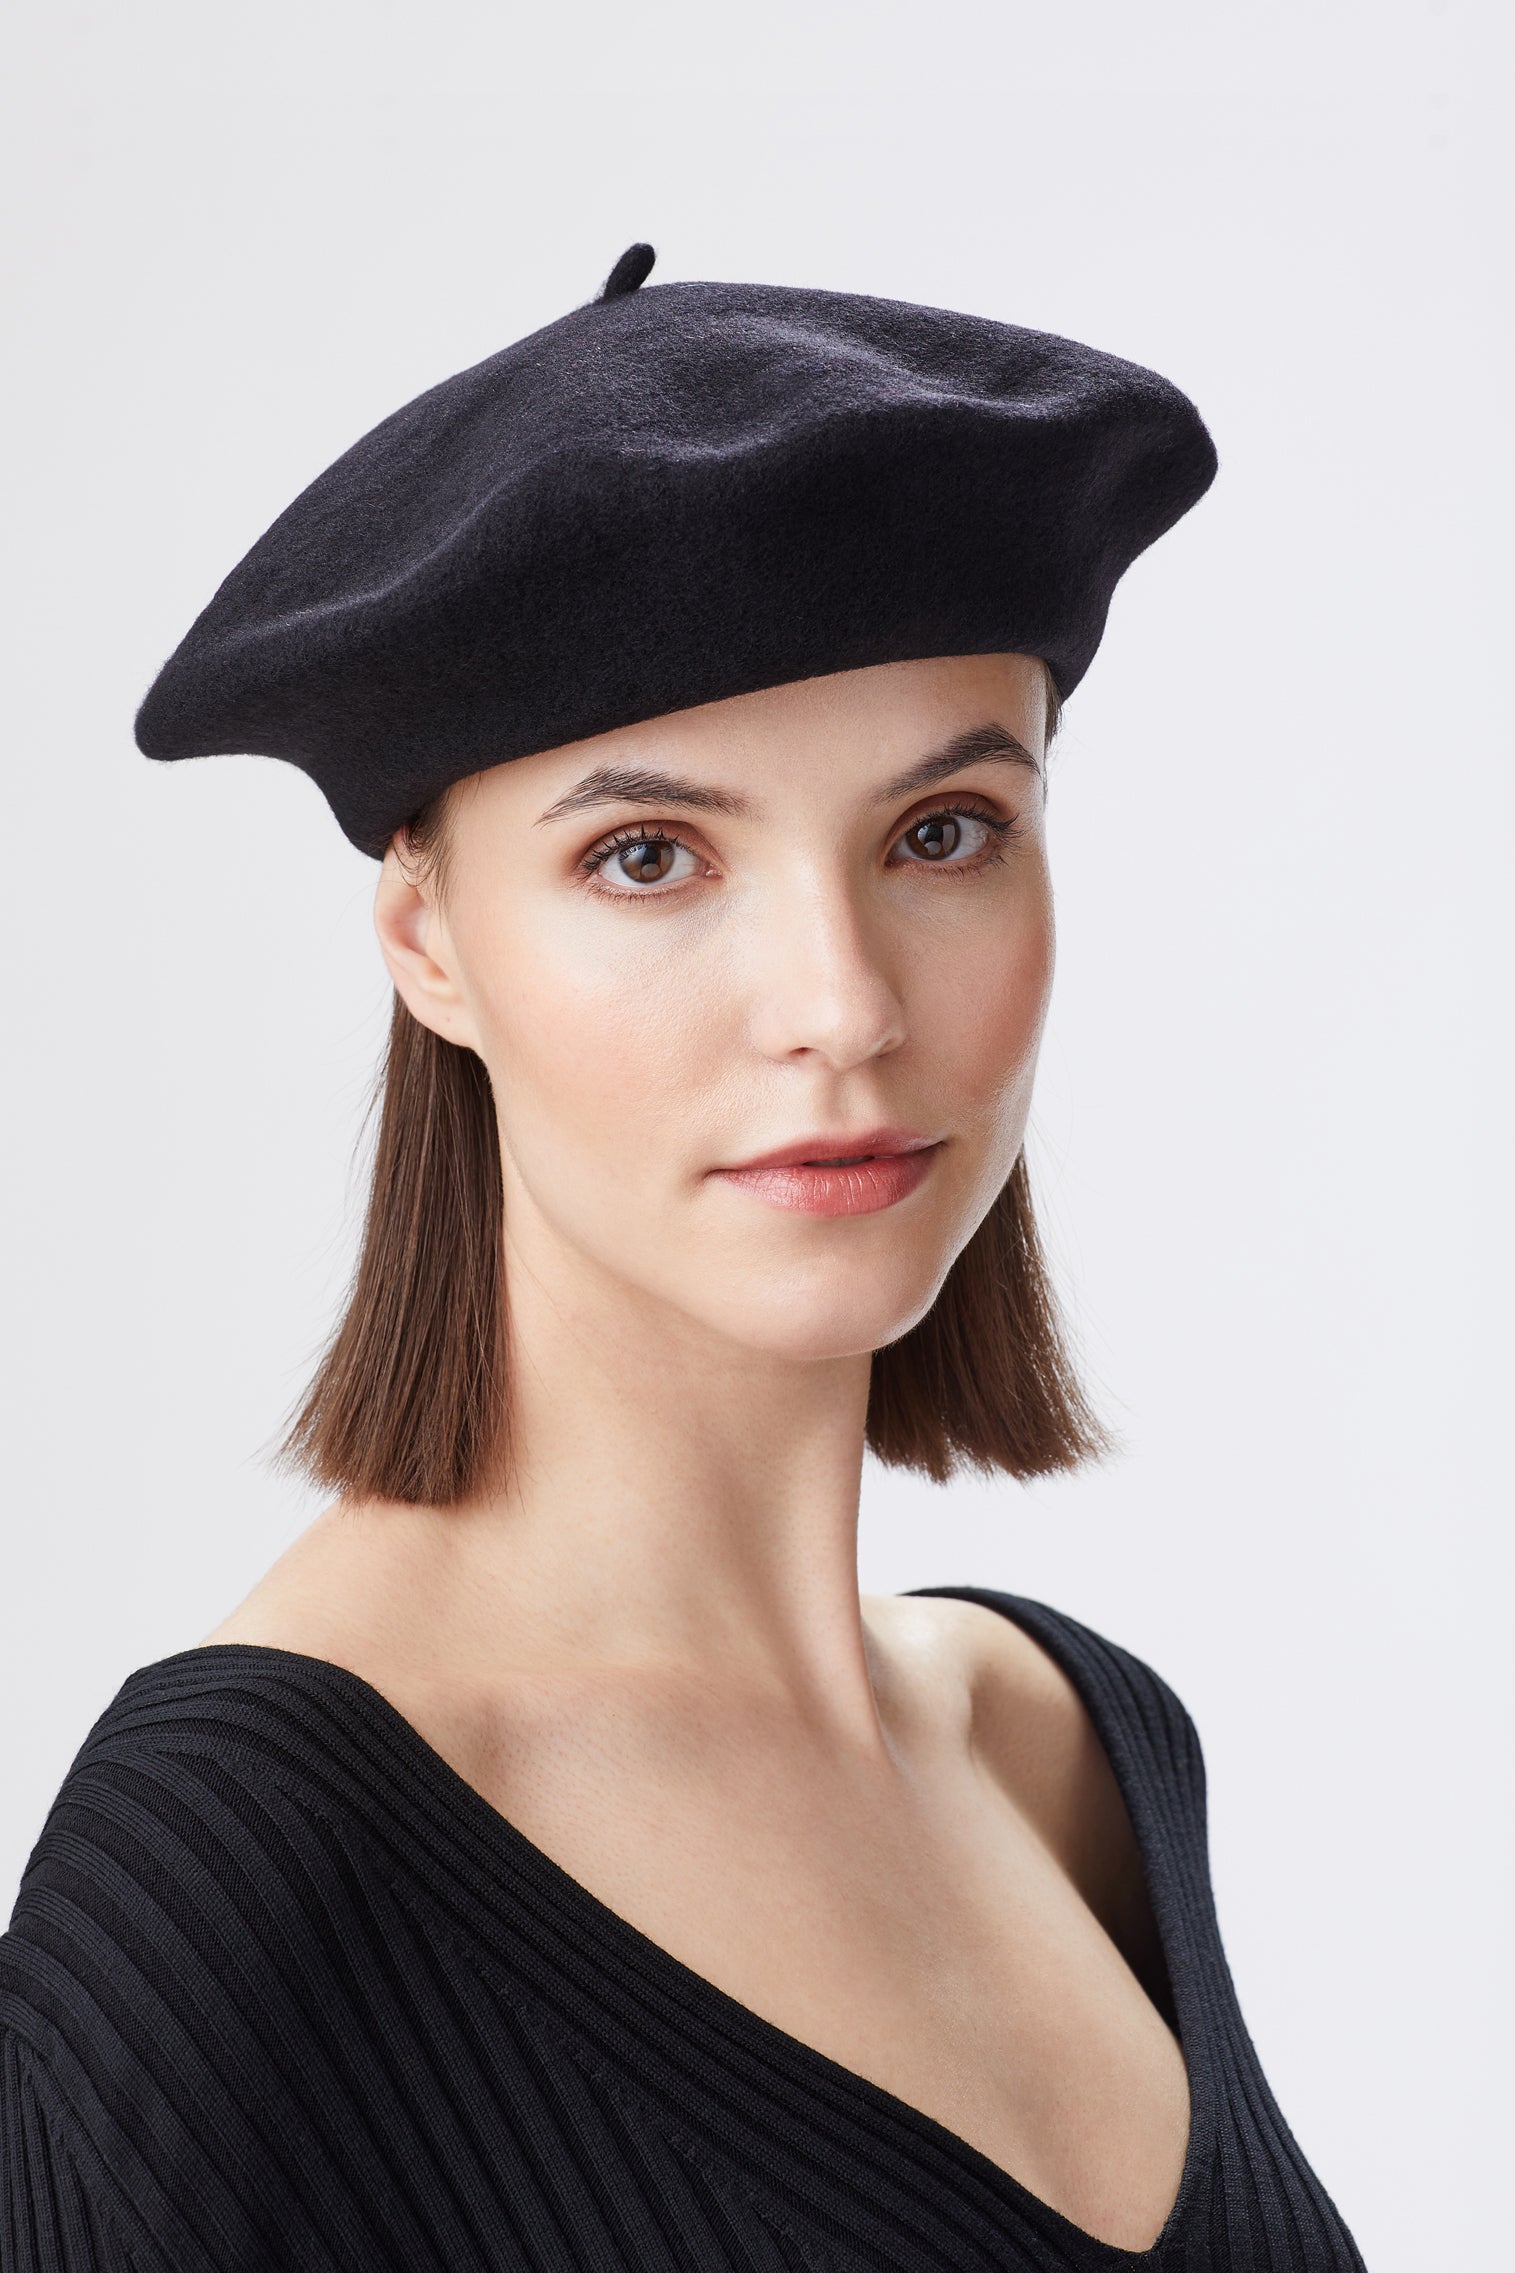 French Beret - Berets - Lock & Co. Hatters London UK